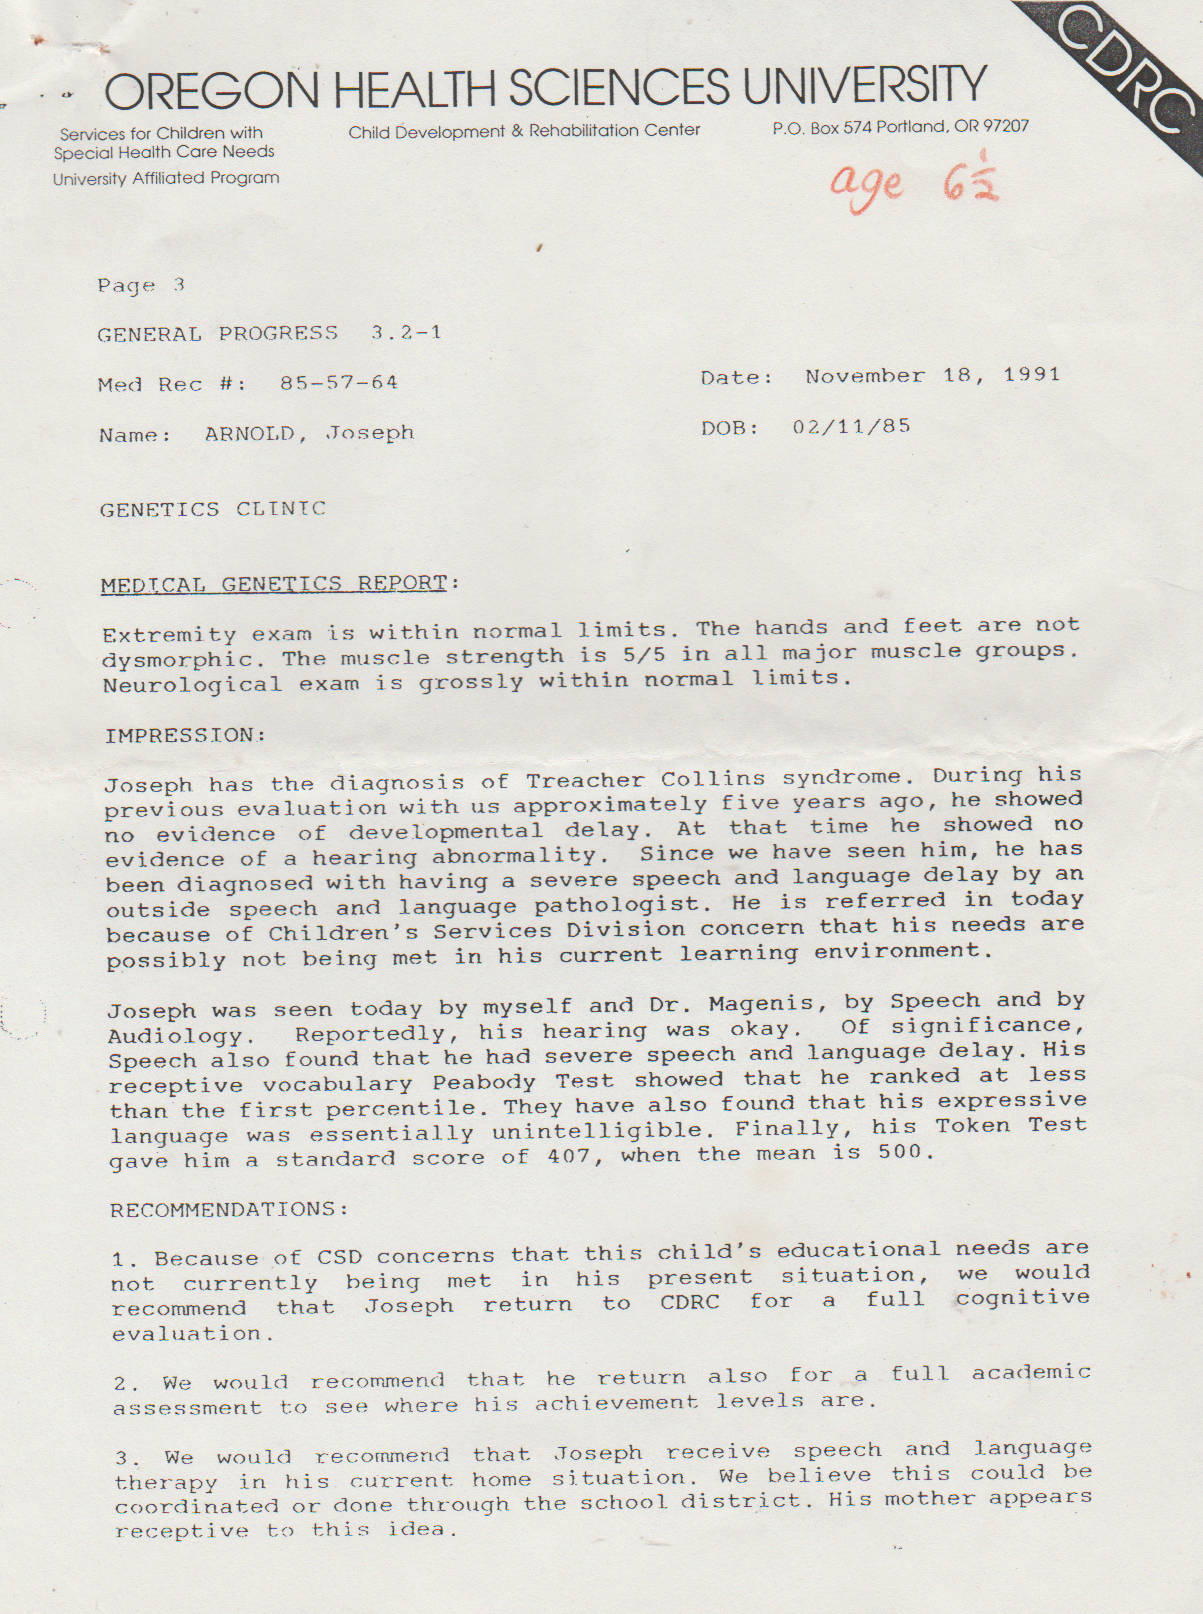 1991-11-18 - Monday - Evaluation of Joey Arnold by some MDs - Oregon Health Sciences University, Portland, OR - 4pages-3.png